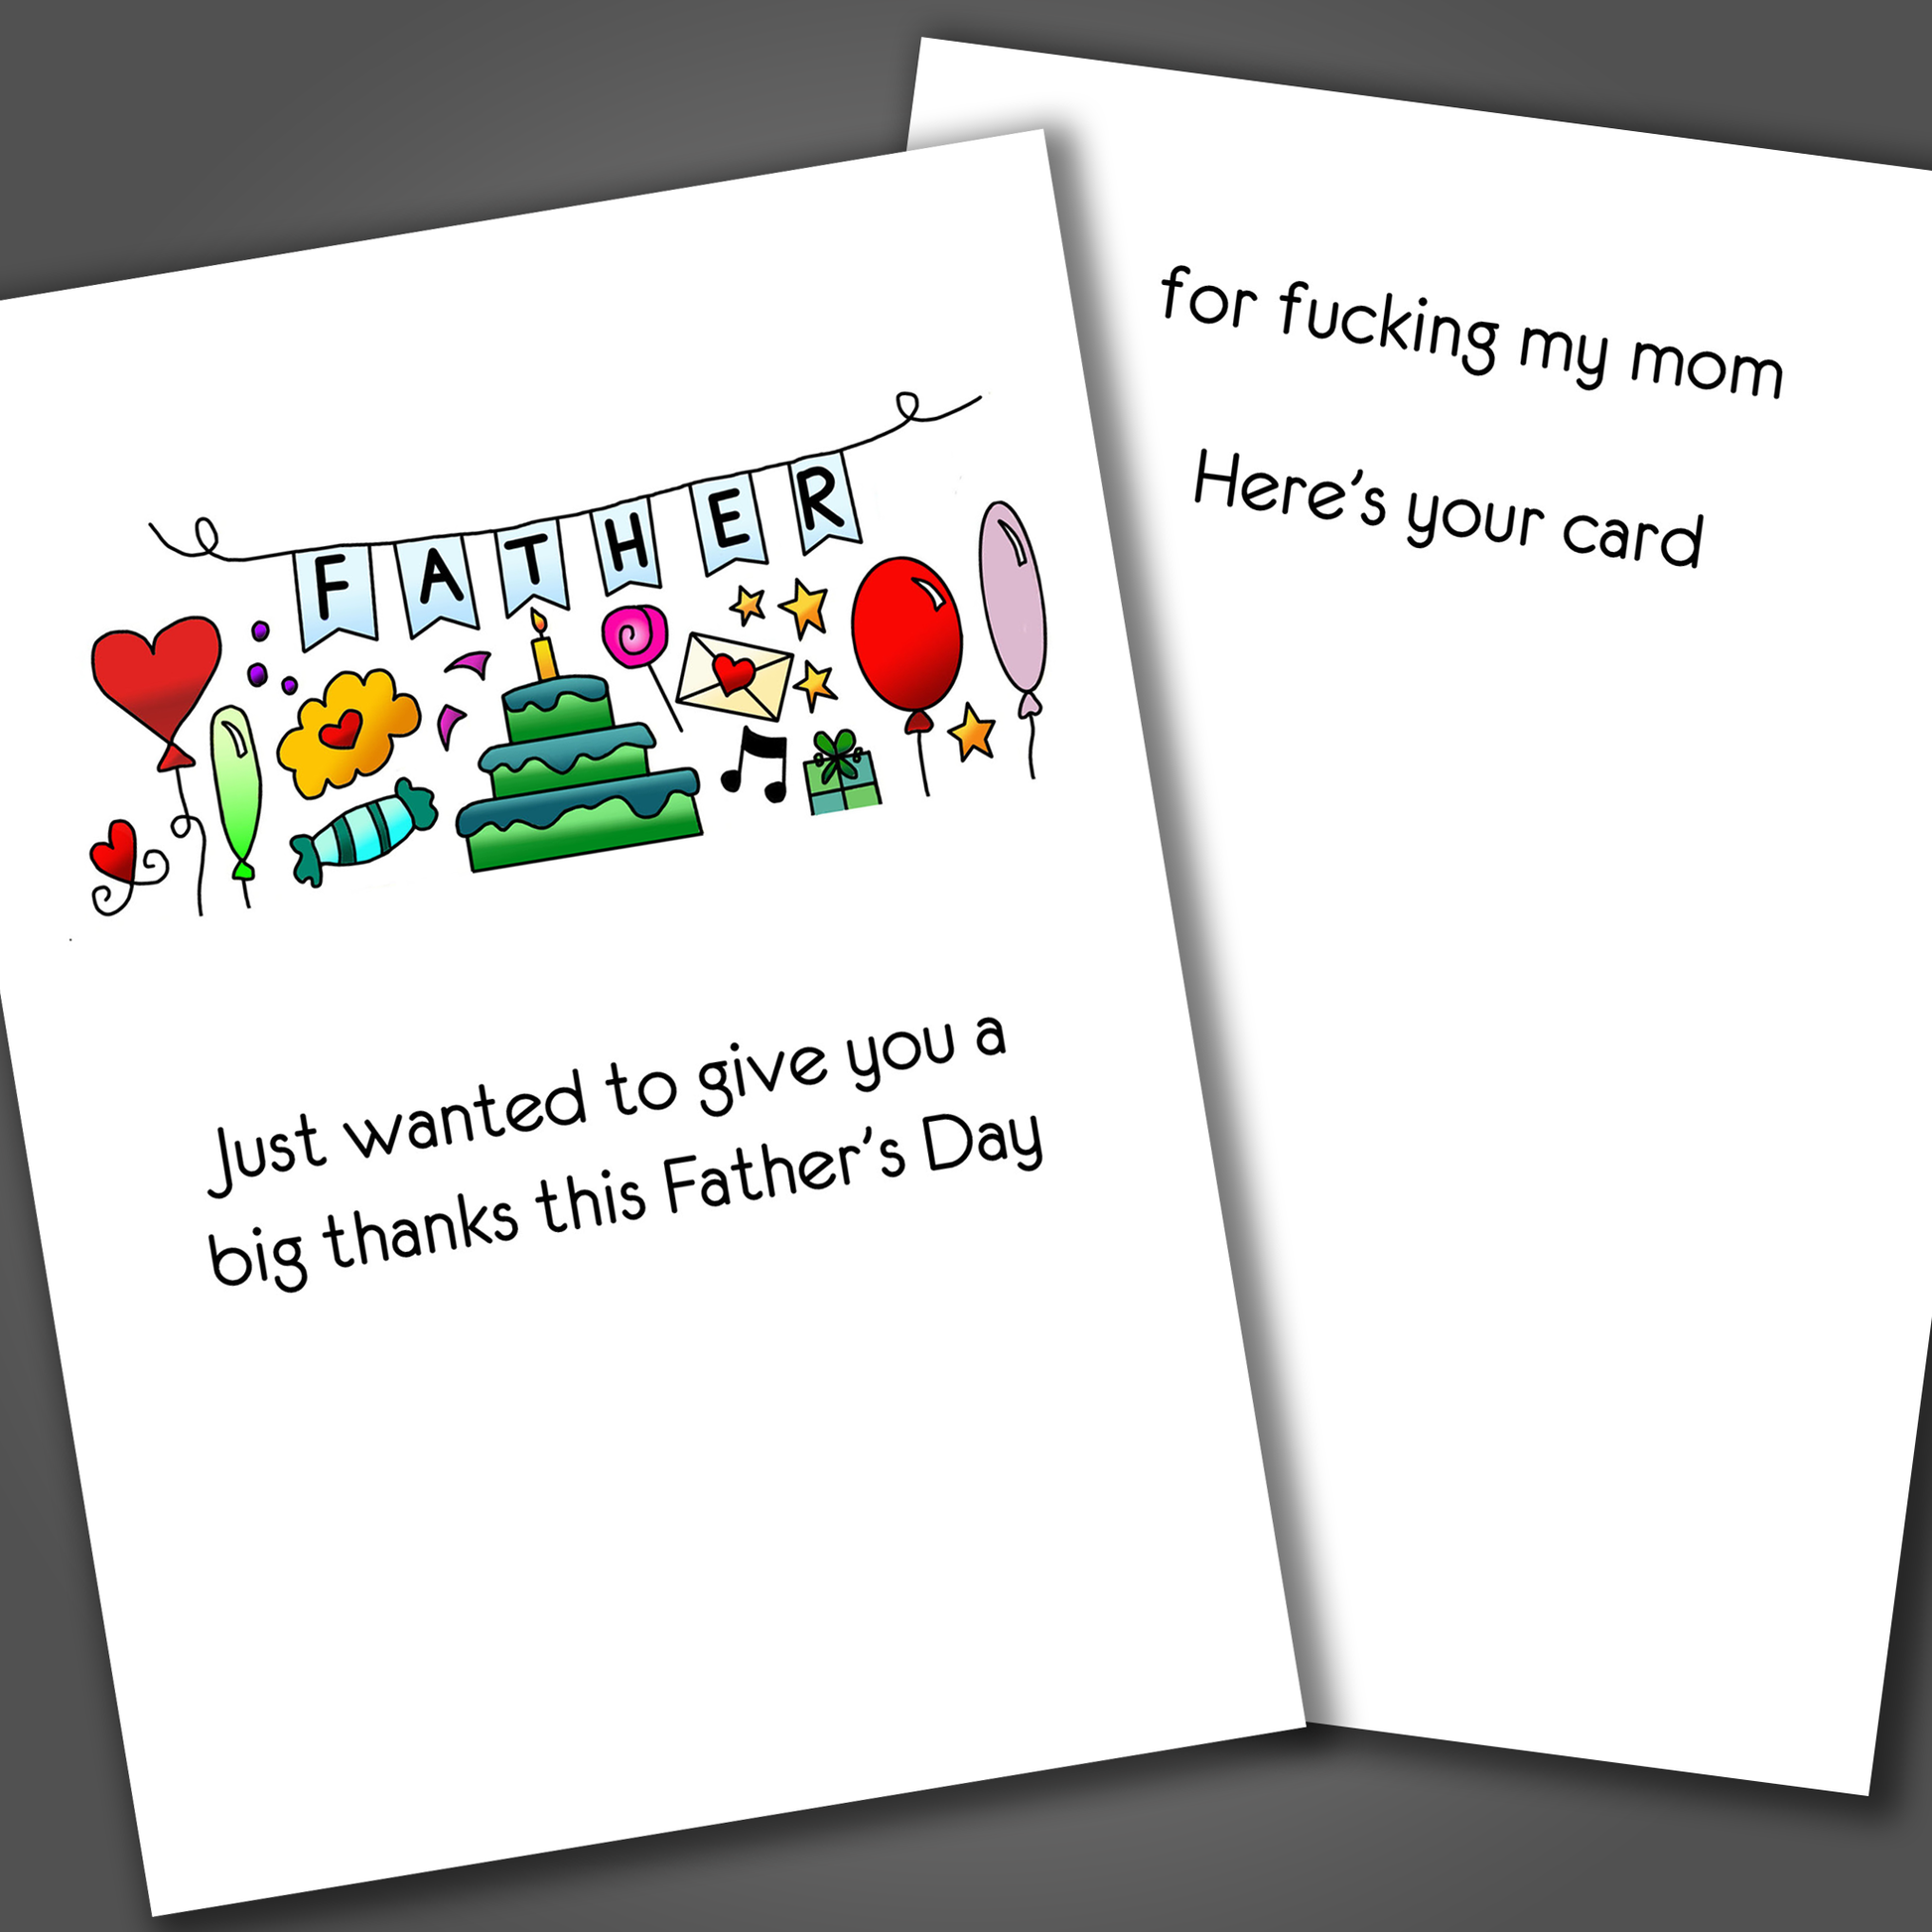 Funny happy father's day card with a cake, flowers and balloons drawn on the front of the card. Inside the card is a funny joke that says thanks for fucking my mom.